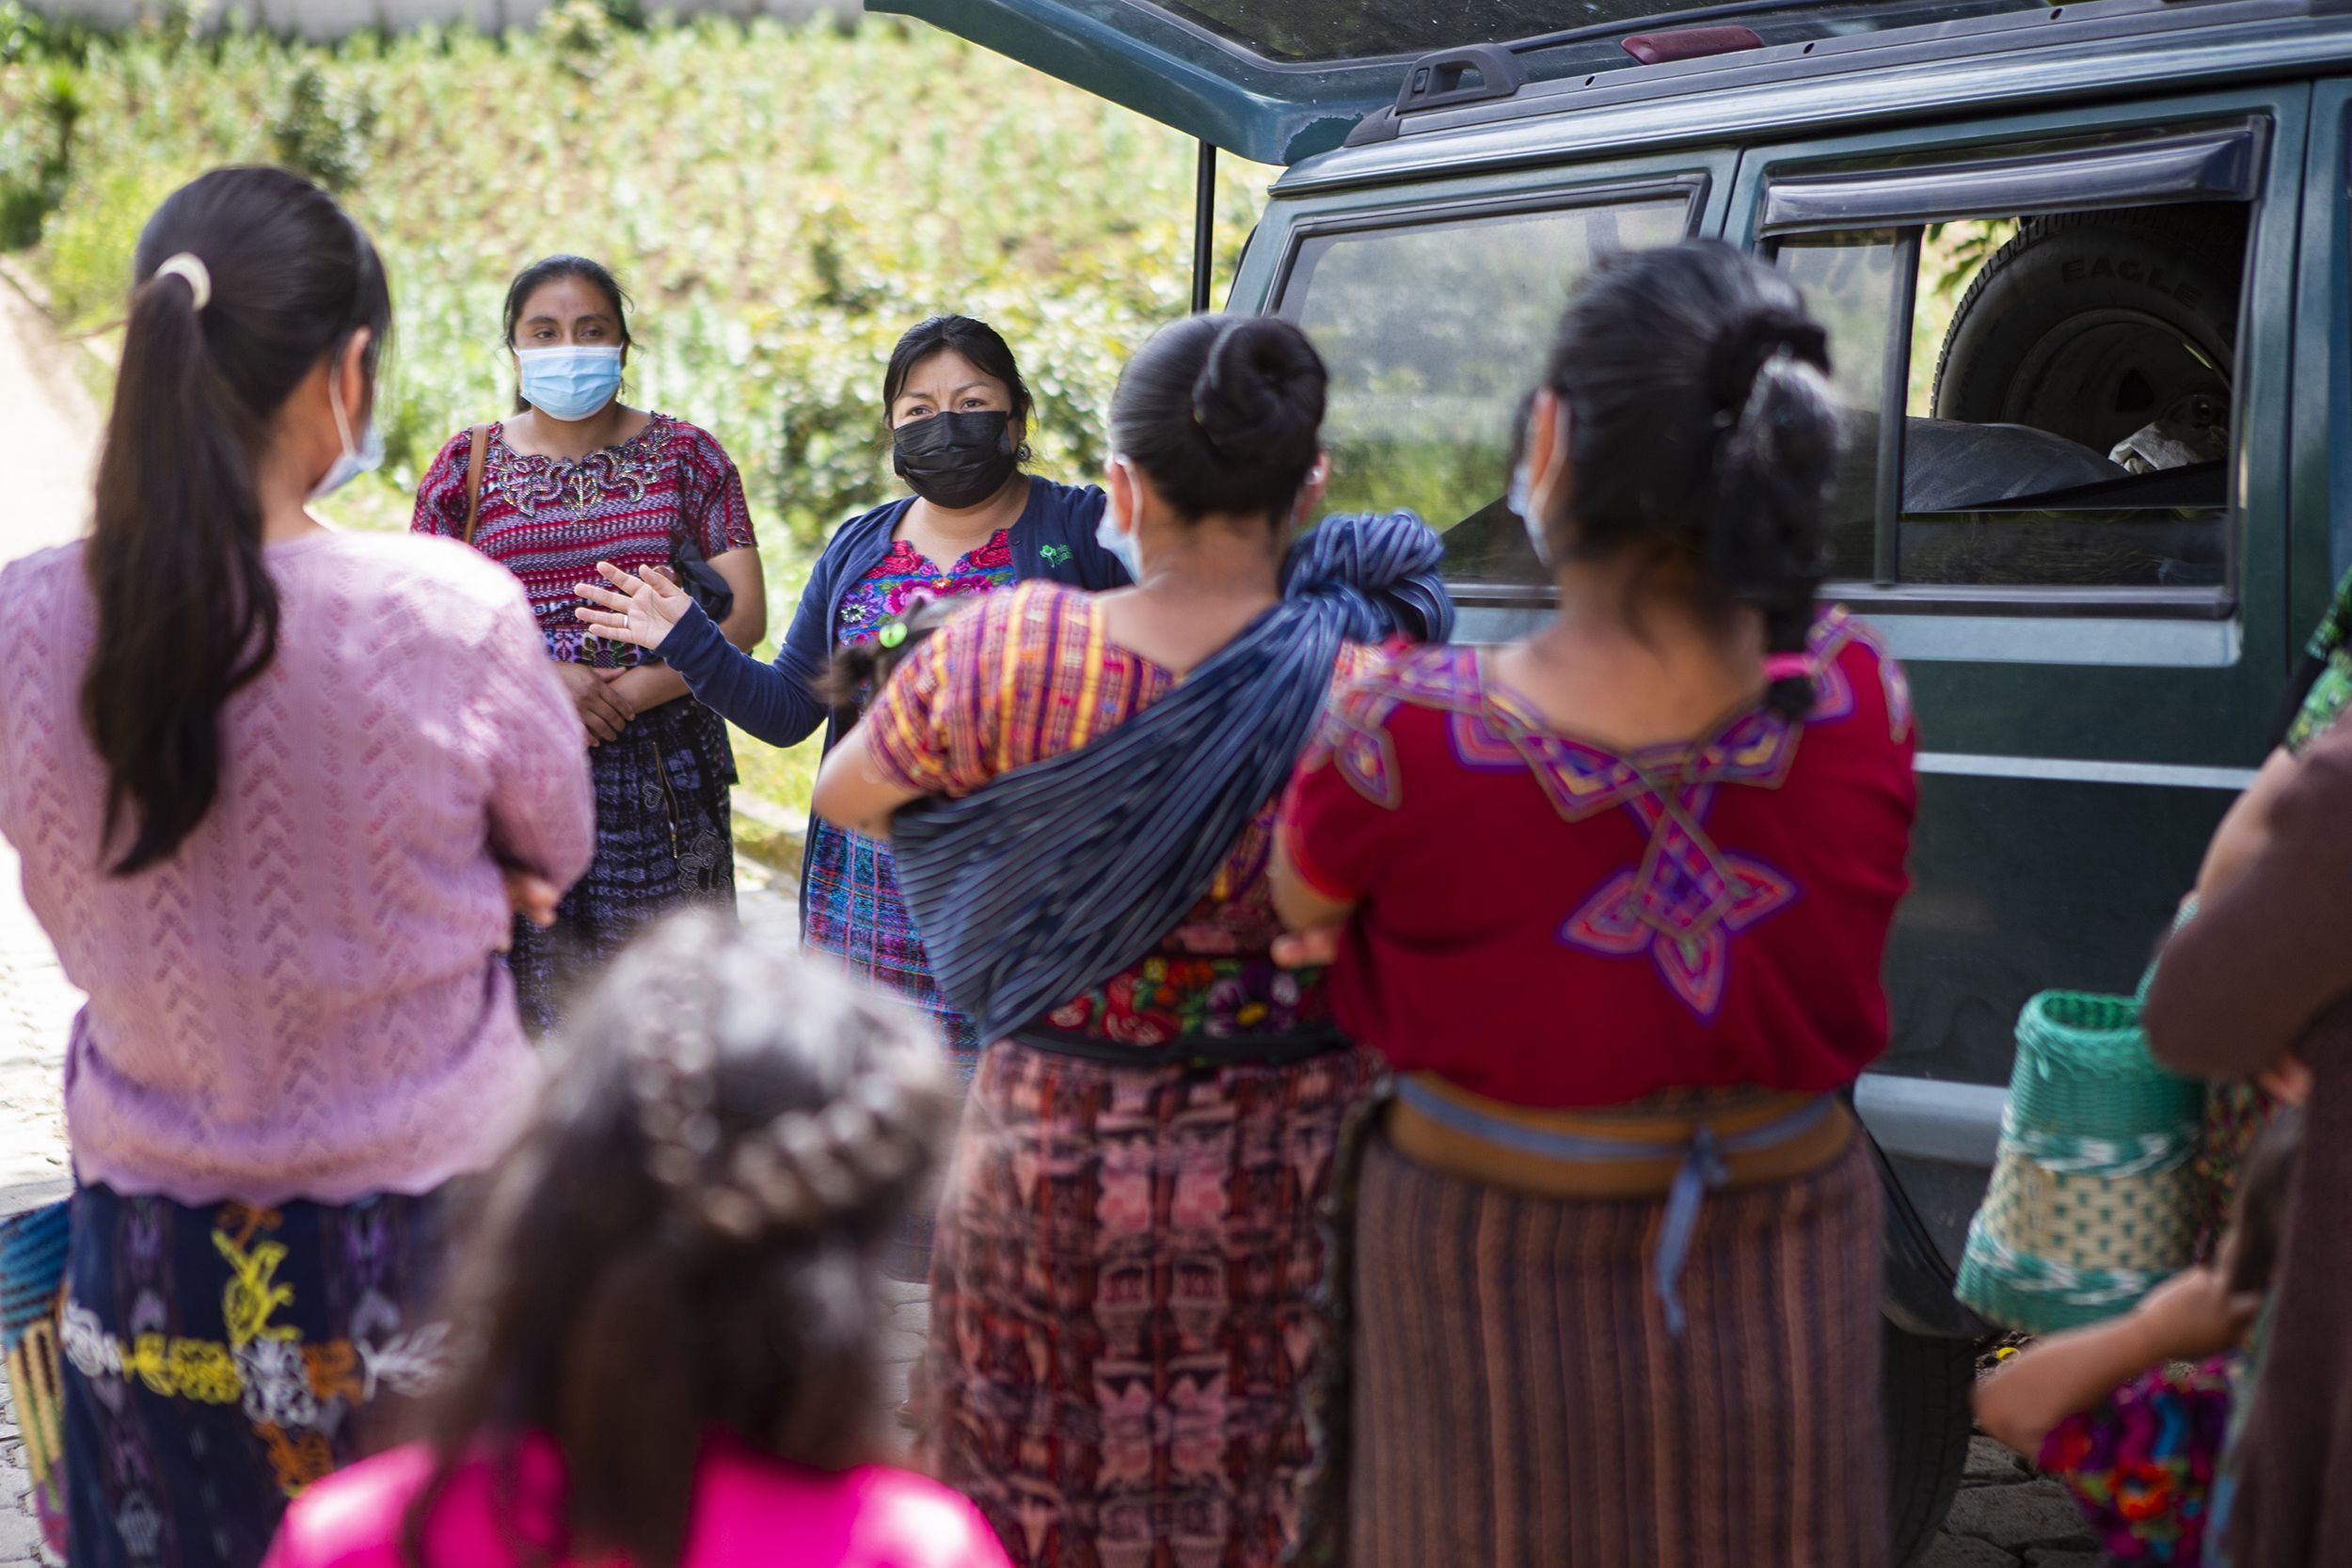 Marily talks with mothers before distributing the Chispuditos "atol".